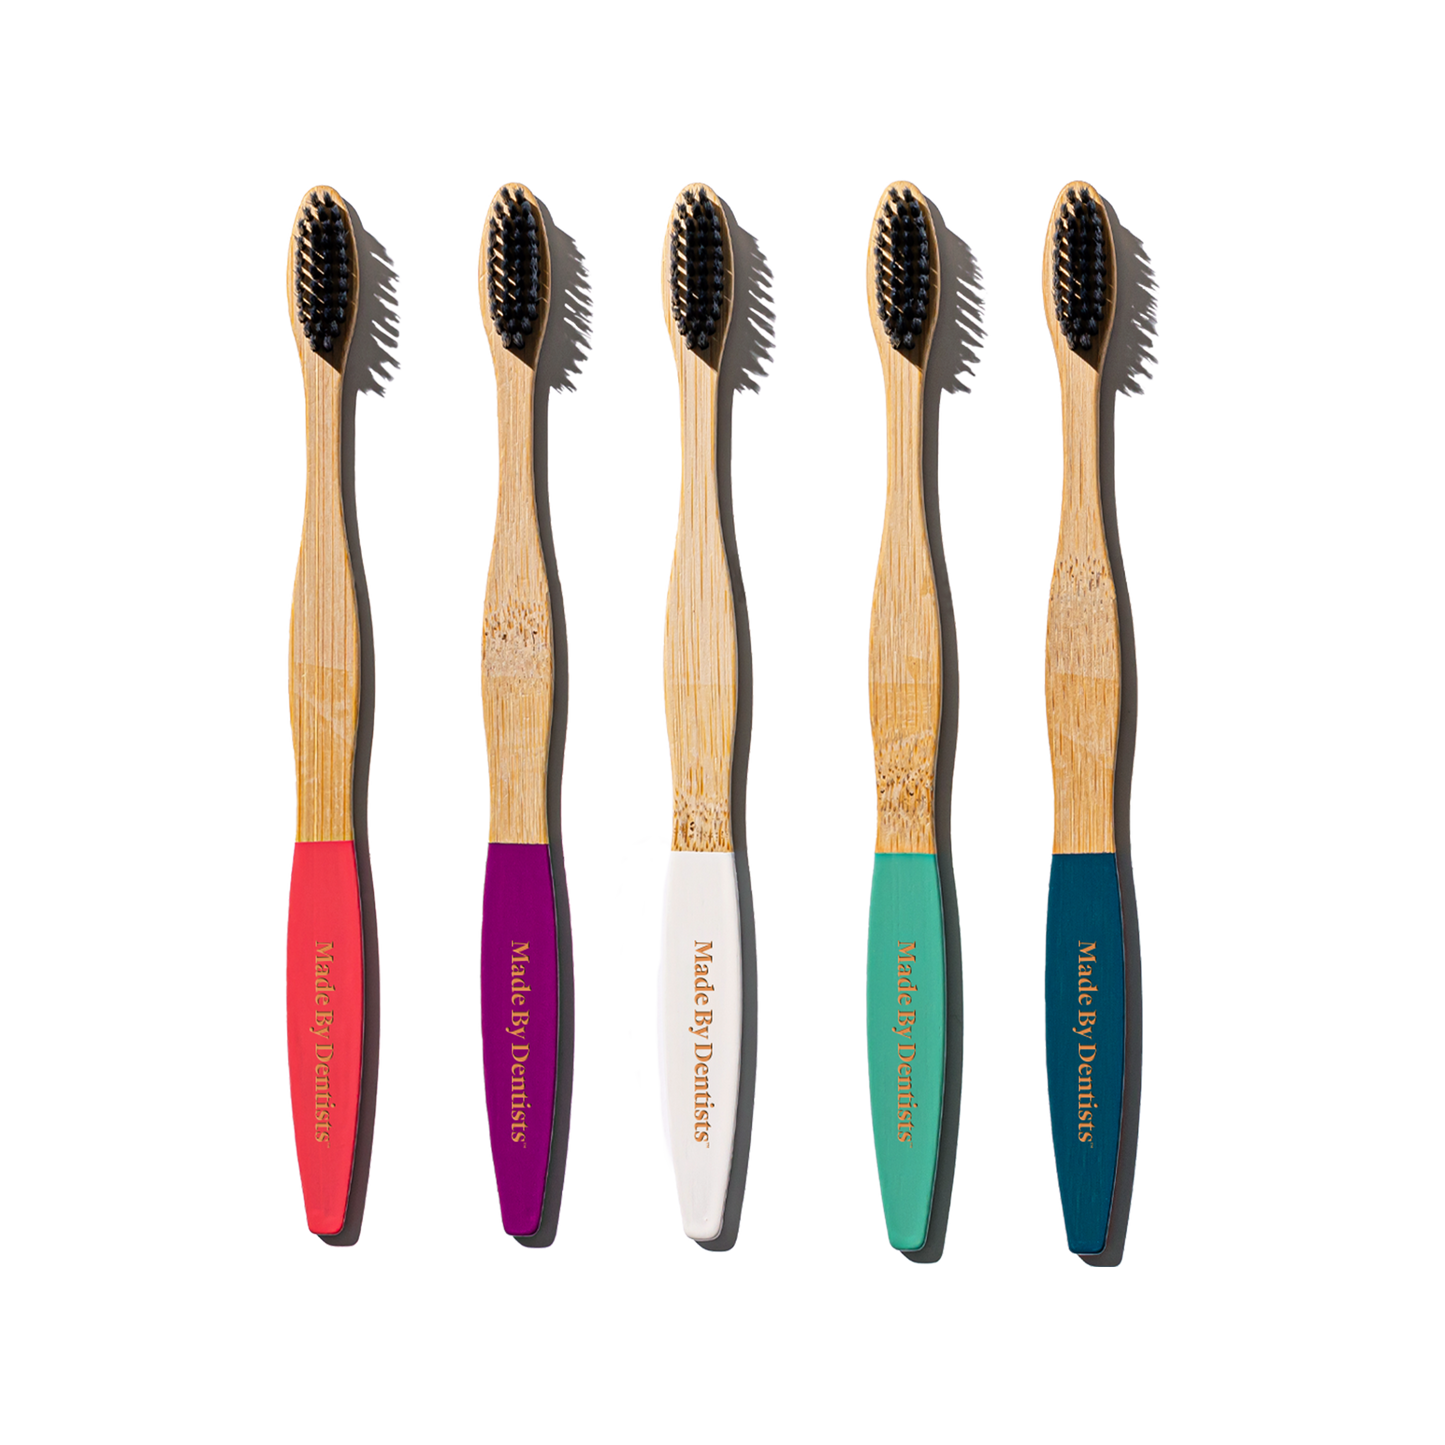 Bamboo Toothbrushes - 5 Pack